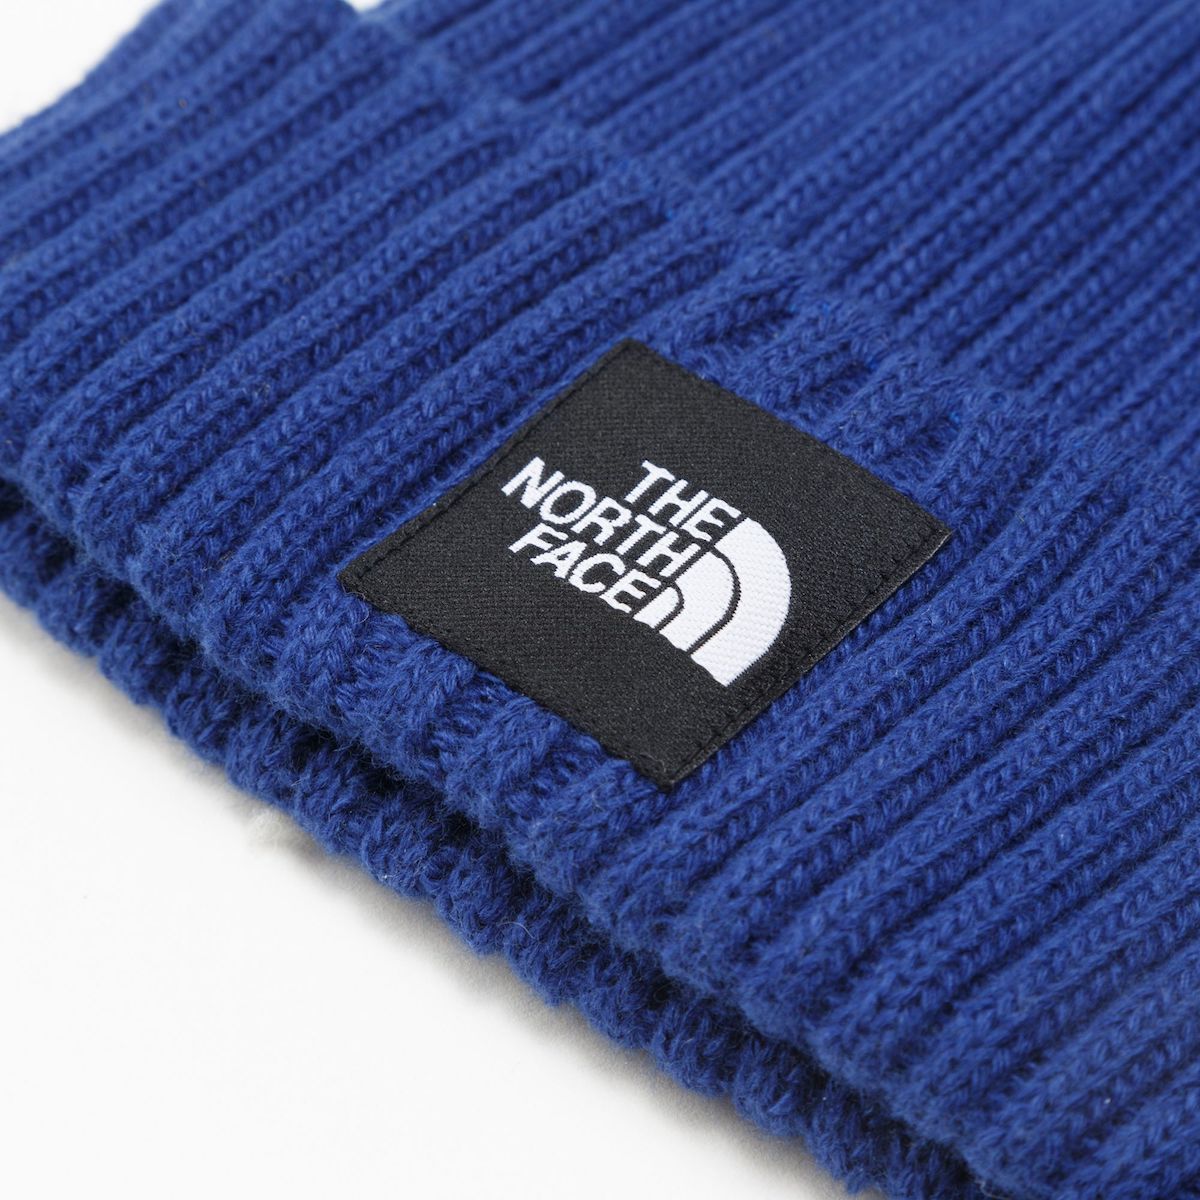 THE NORTH FACE Cappucho Lid